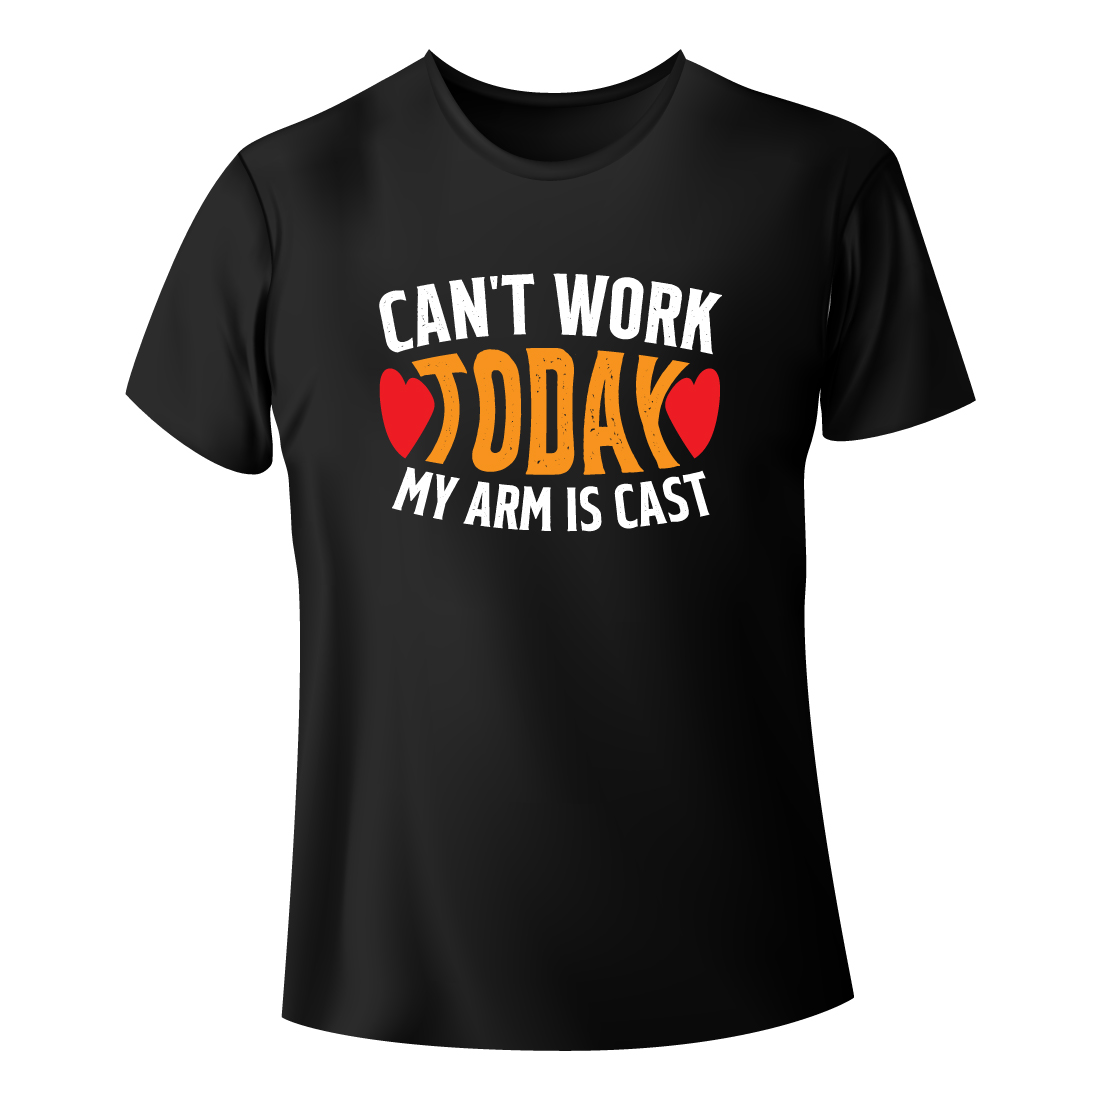 Picture of a black T-shirt with exquisite slogan Cant Work Today My Arm Is Cast.